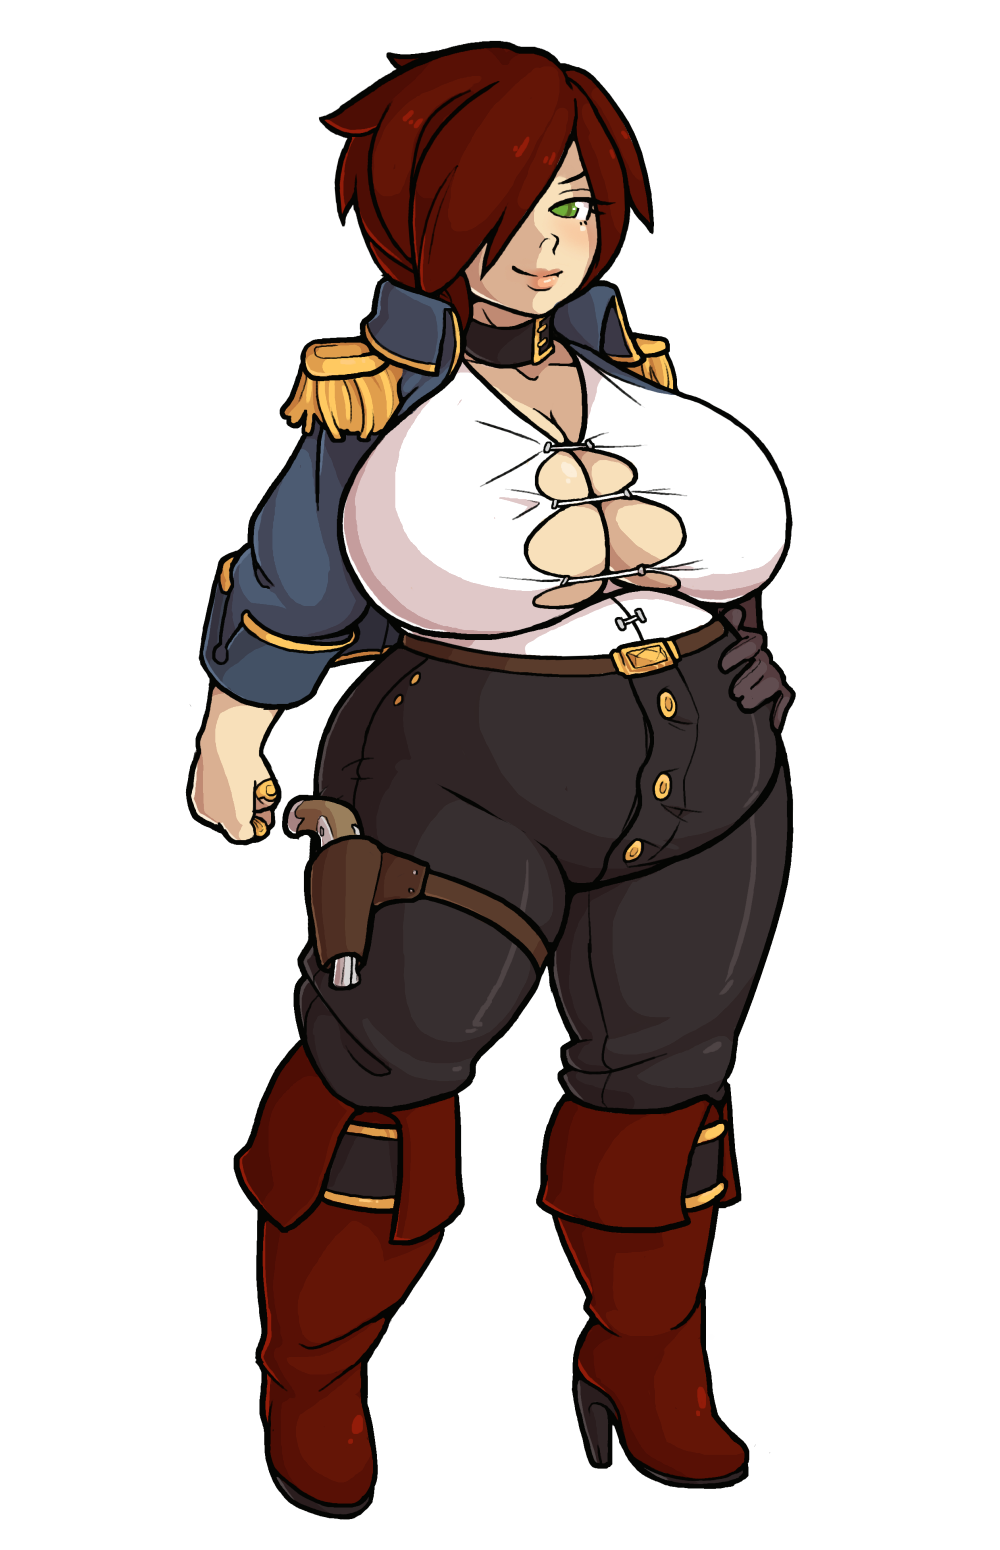 Commission - Pirate Queen